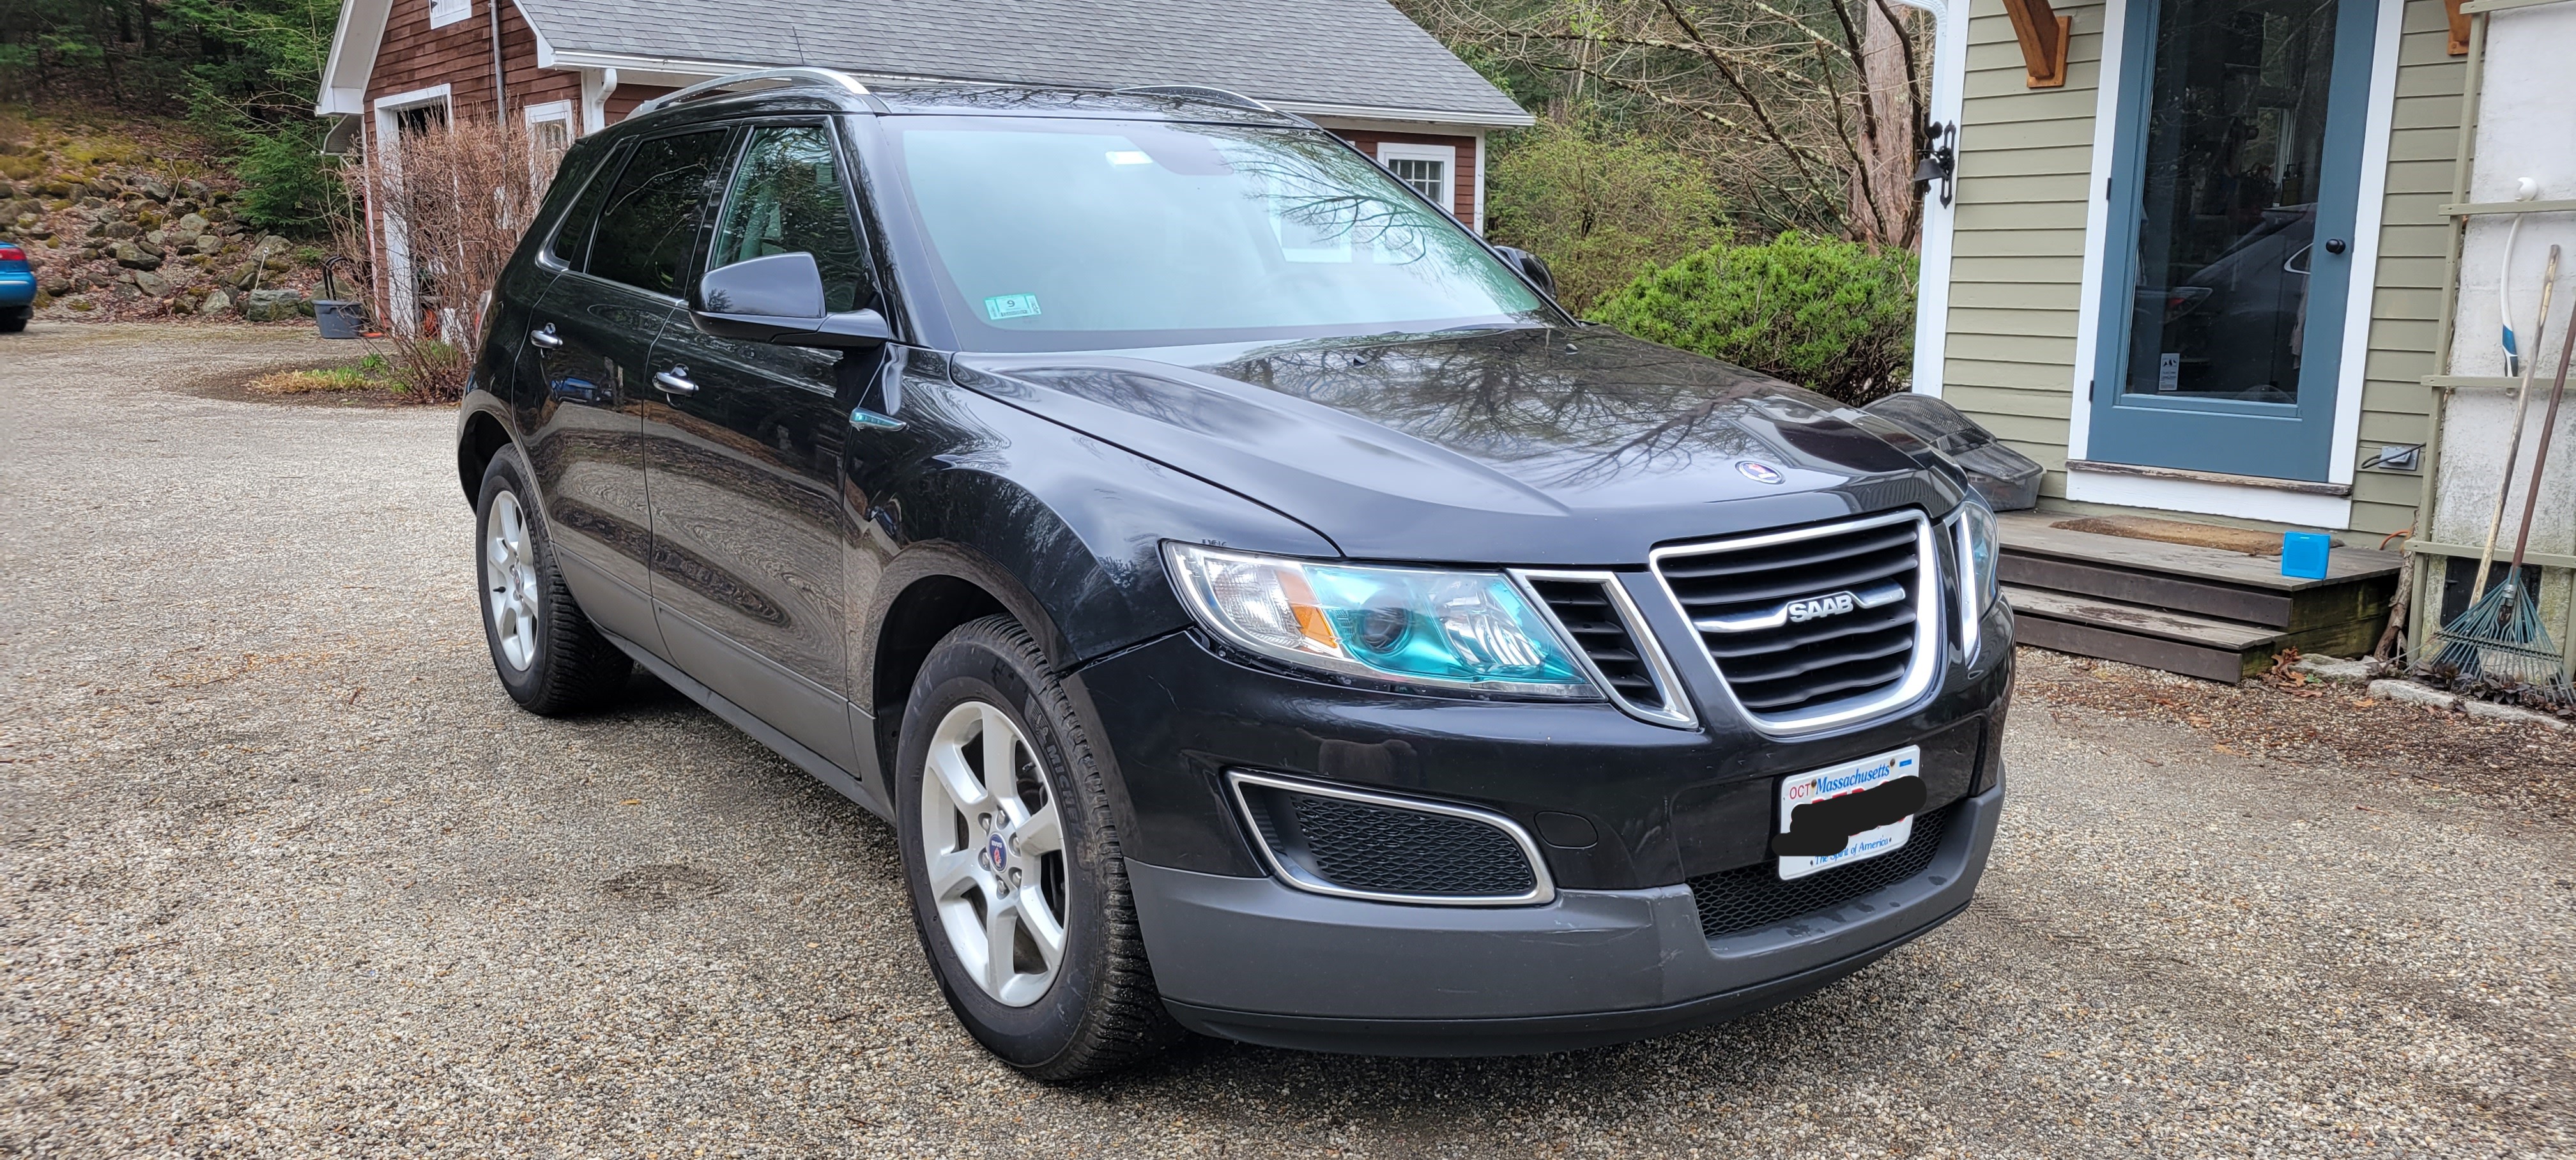 Used Saab 9-4X for Sale Right Now - Autotrader